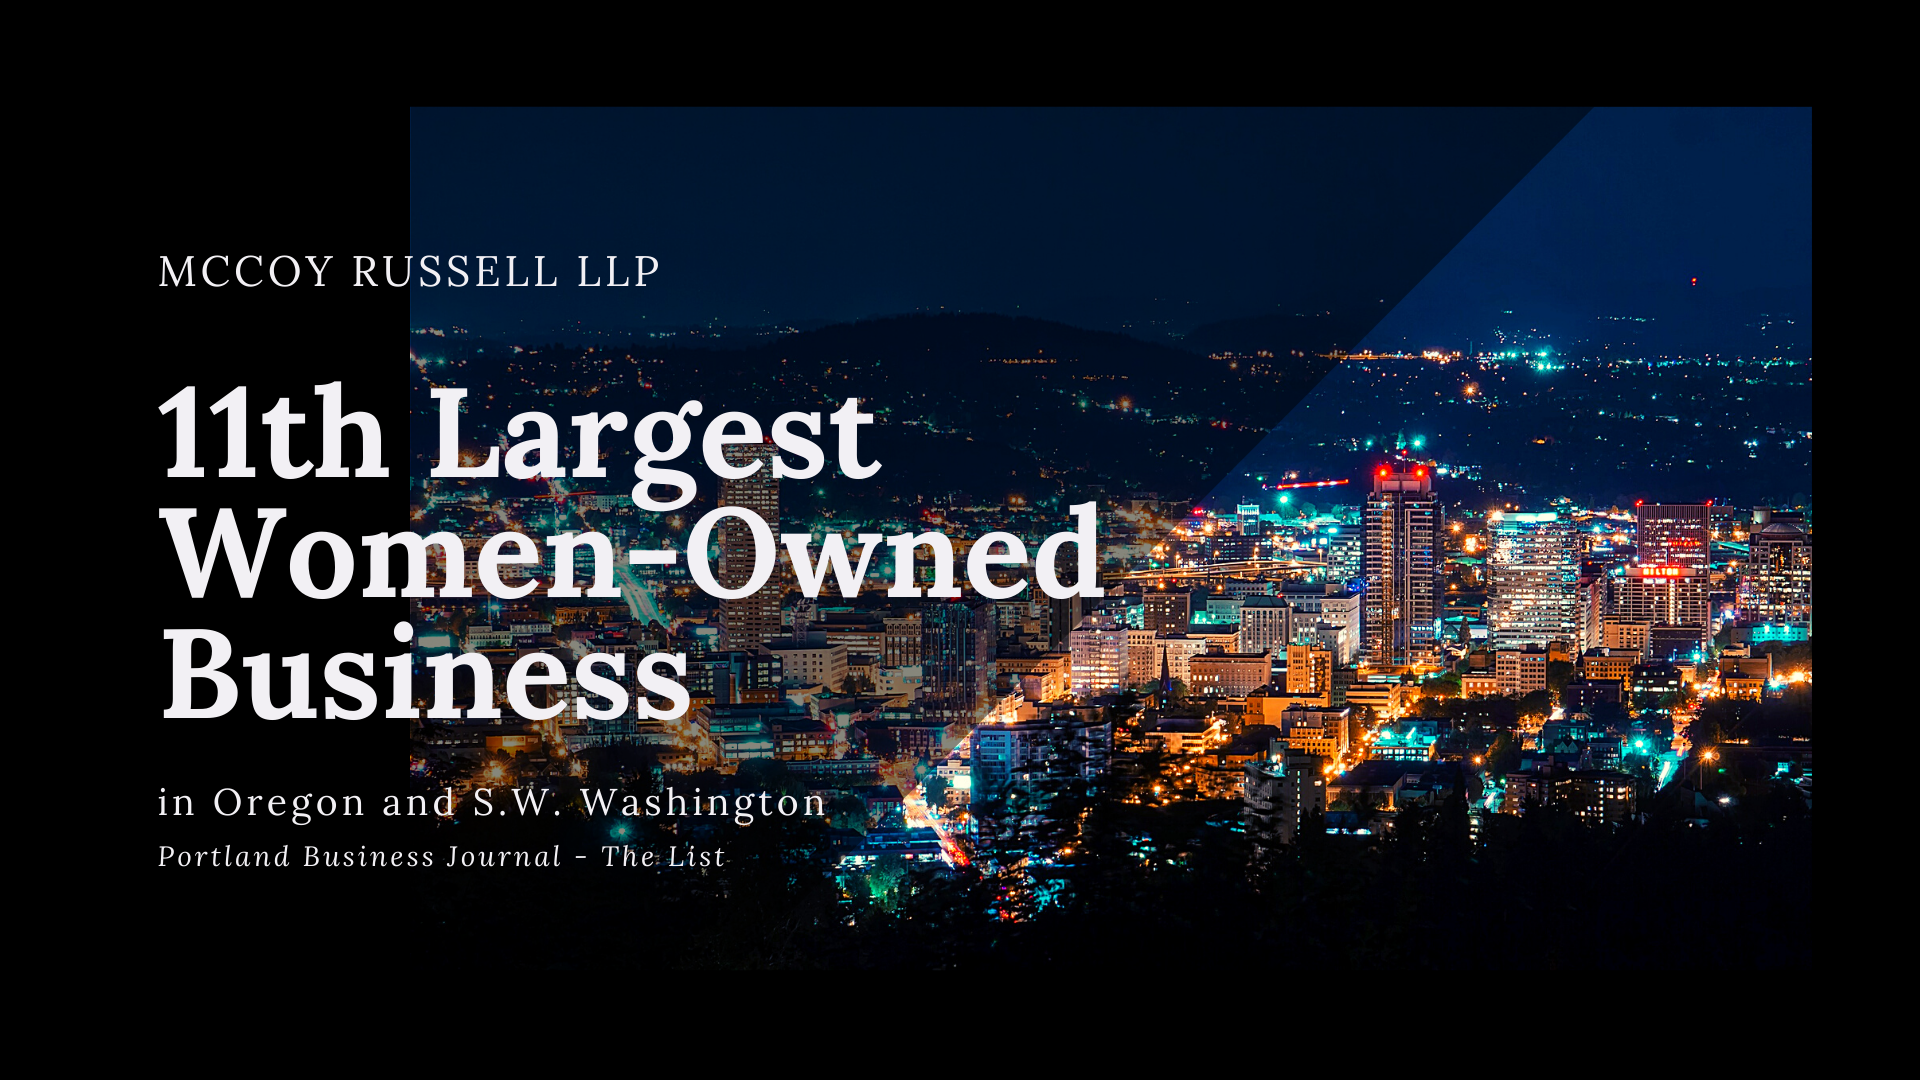 McCoy Russell One of The Largest Women-Owned Businesses in Oregon & S.W. Washington